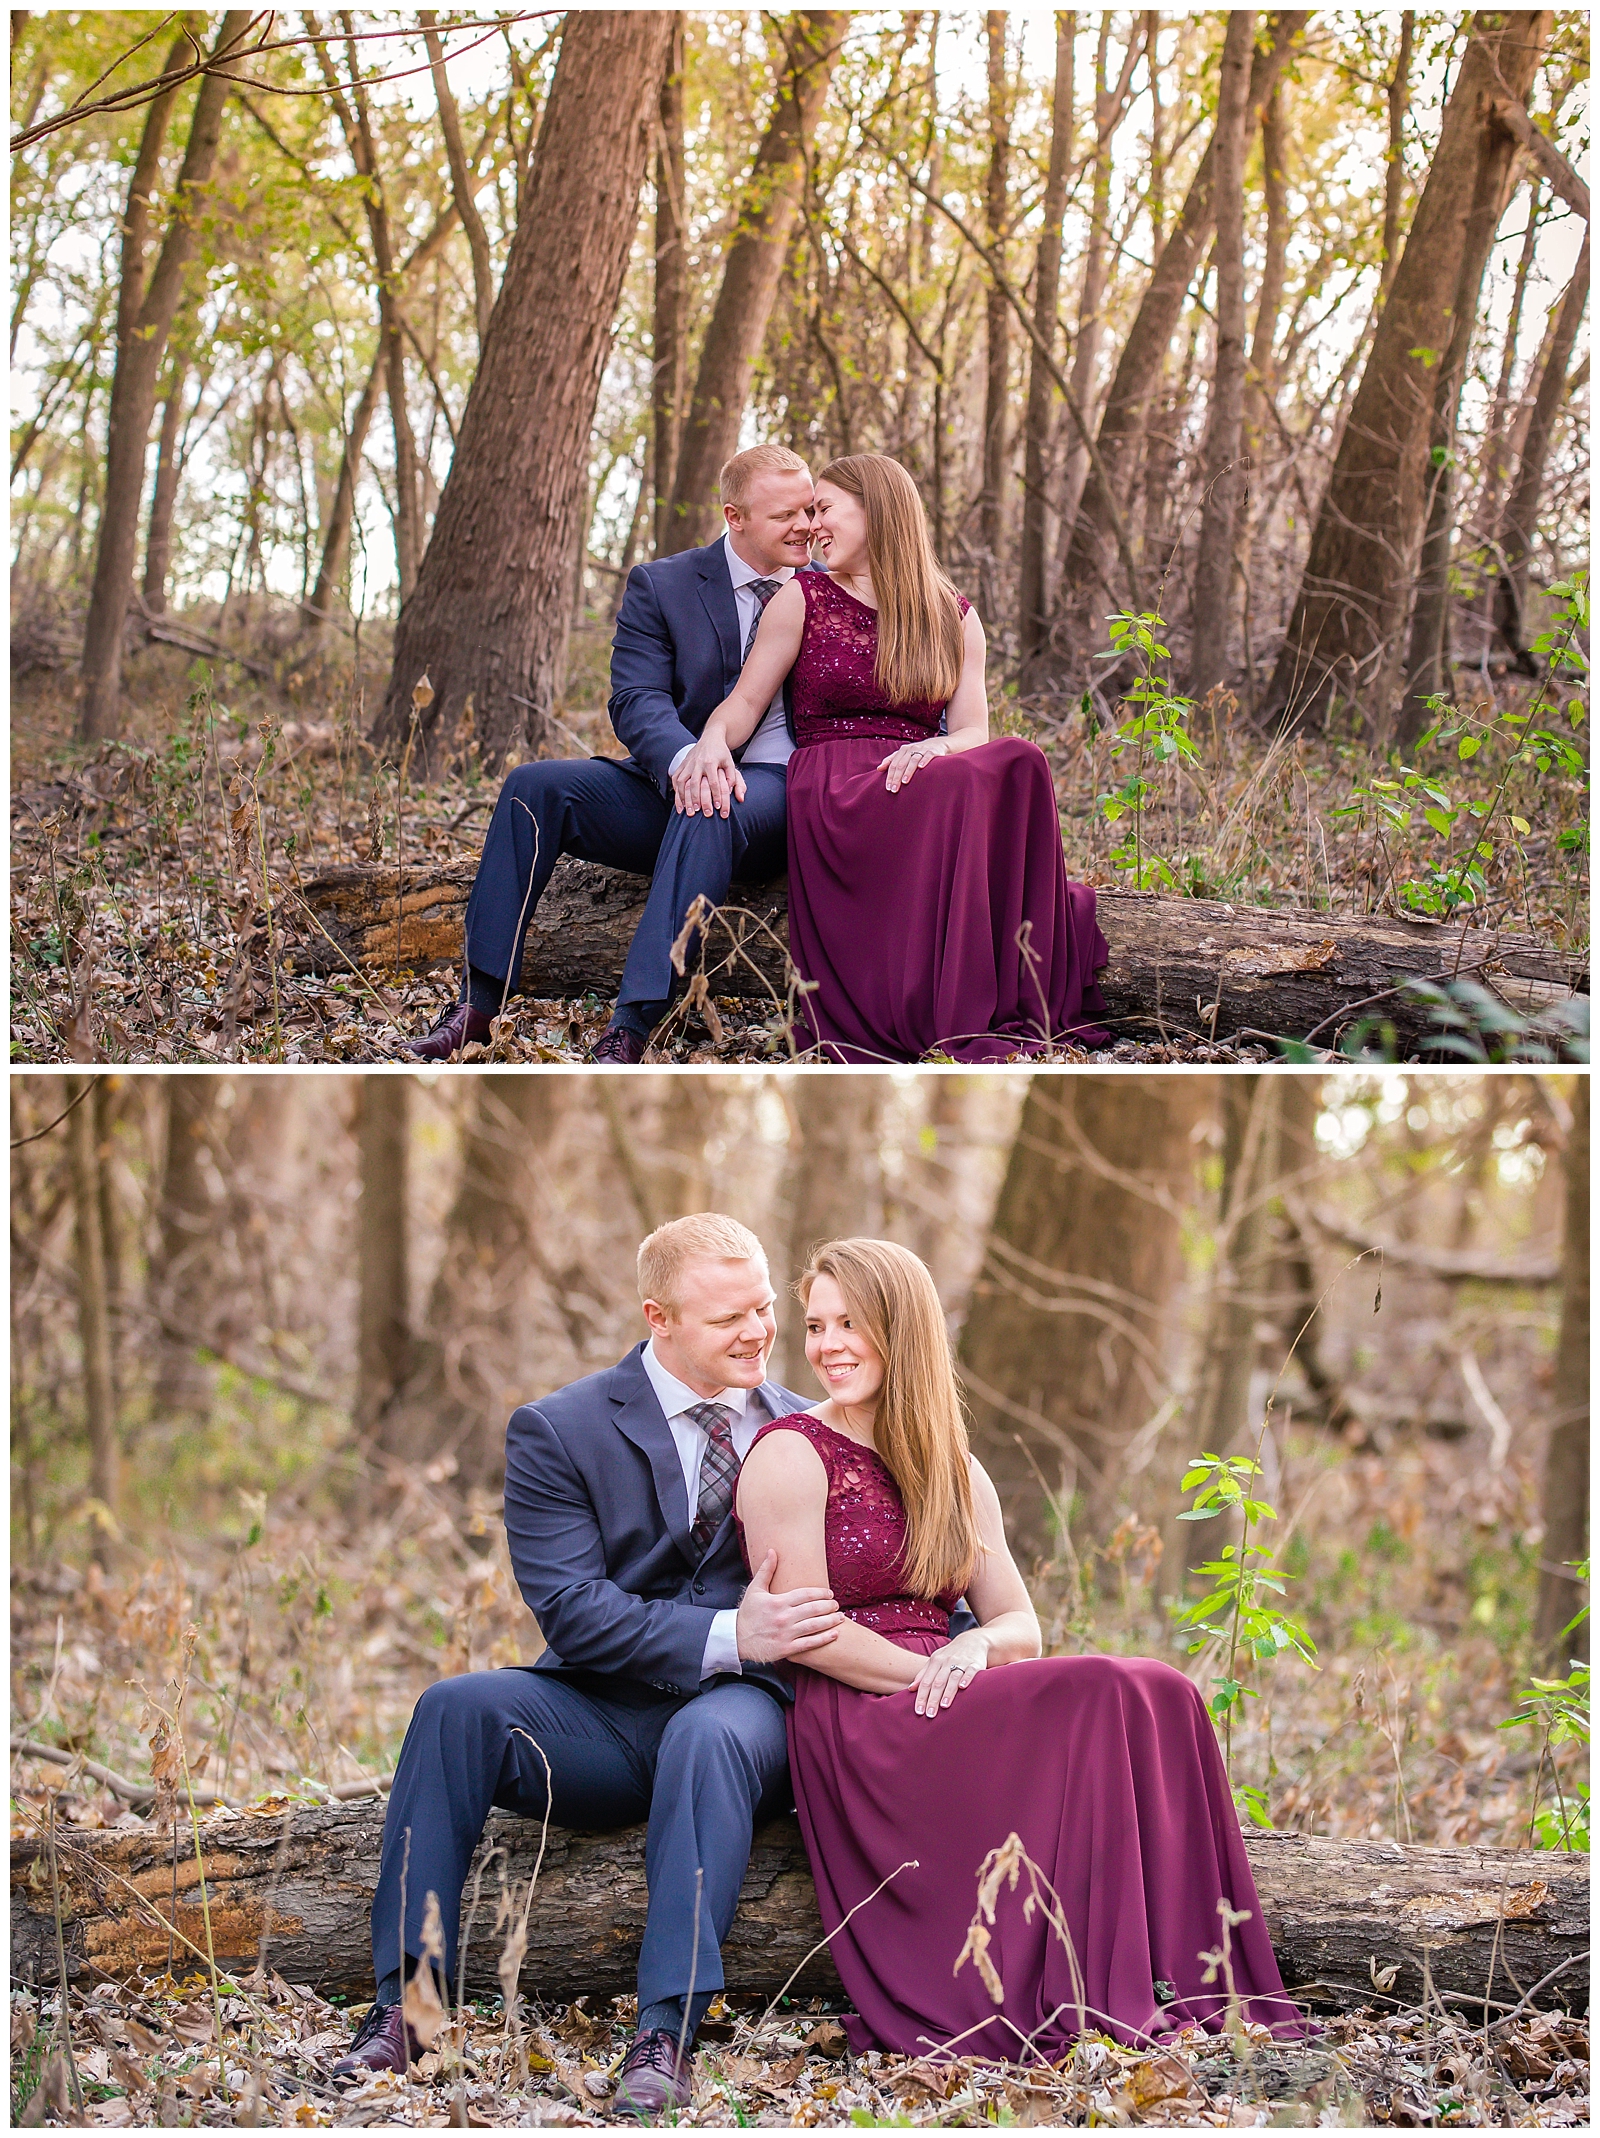 Engagement photography at the Little Blue Trace in Independence, Missouri, by Kansas City wedding photographers Wisdom-Watson Weddings.